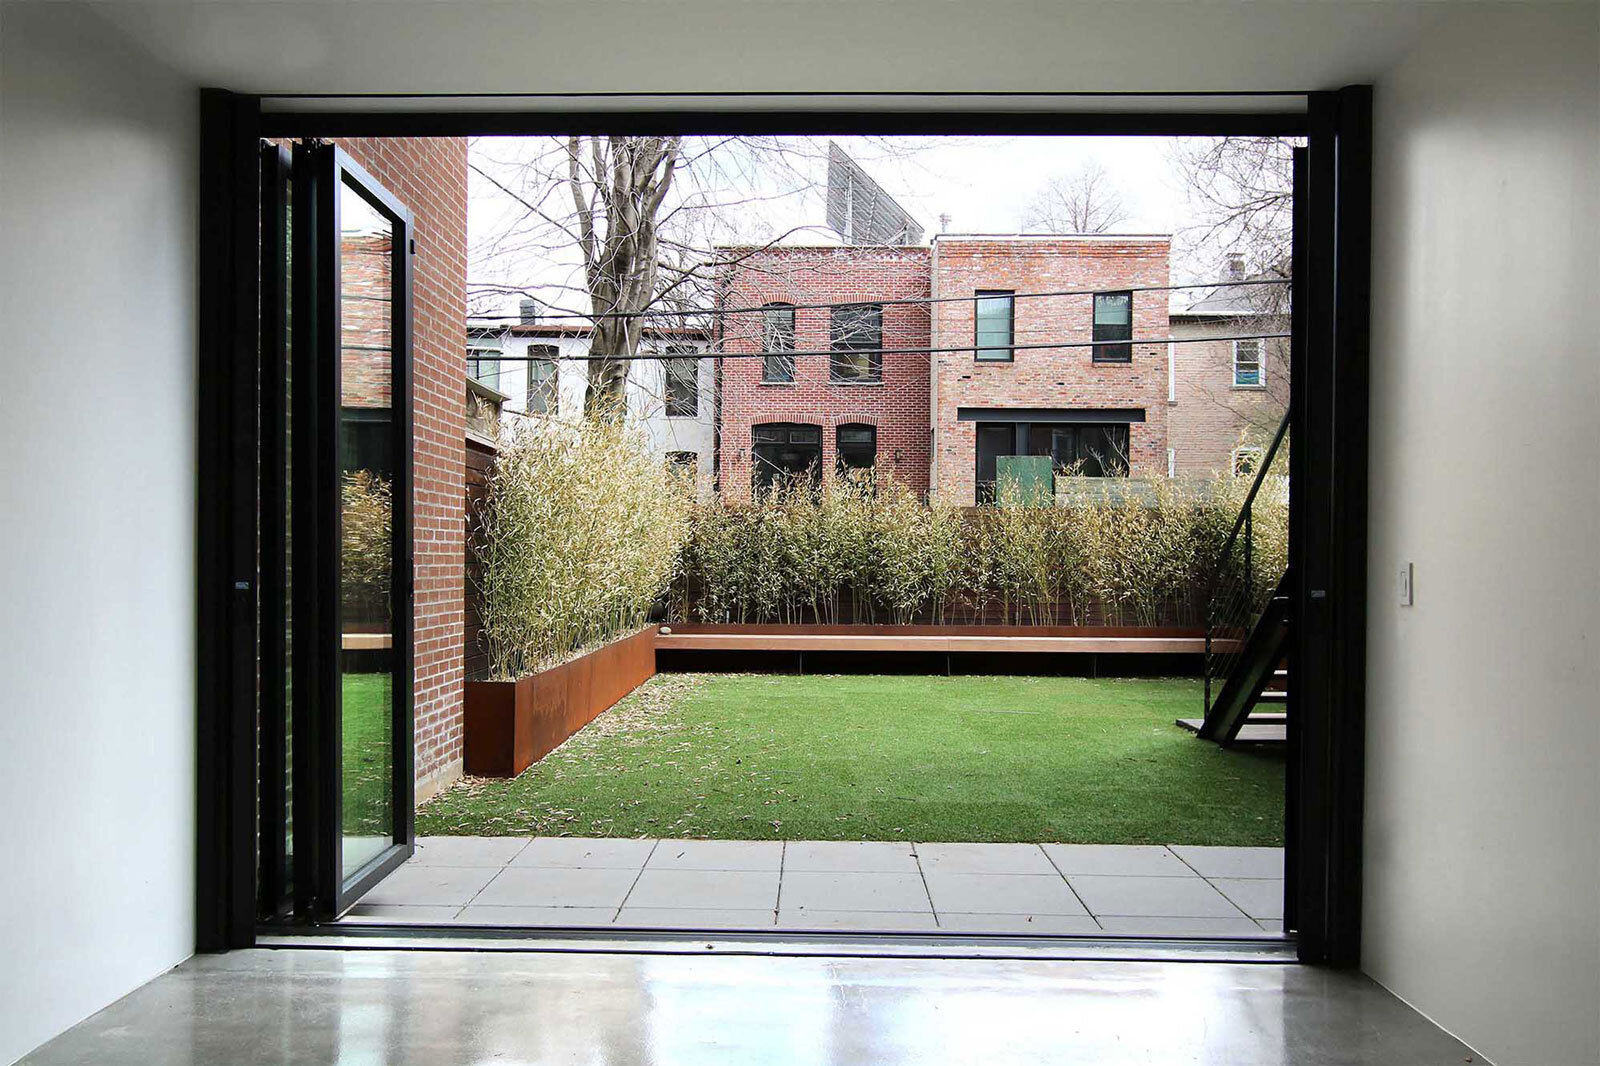 18-res4-re4a-resolution-4-architecture-park-slope-townhouse-brooklyn-modern-home-garden-level-playroom-to-backyard-artificial-turf-bamboo-planters-nanawall-folding-glass-doors.jpg